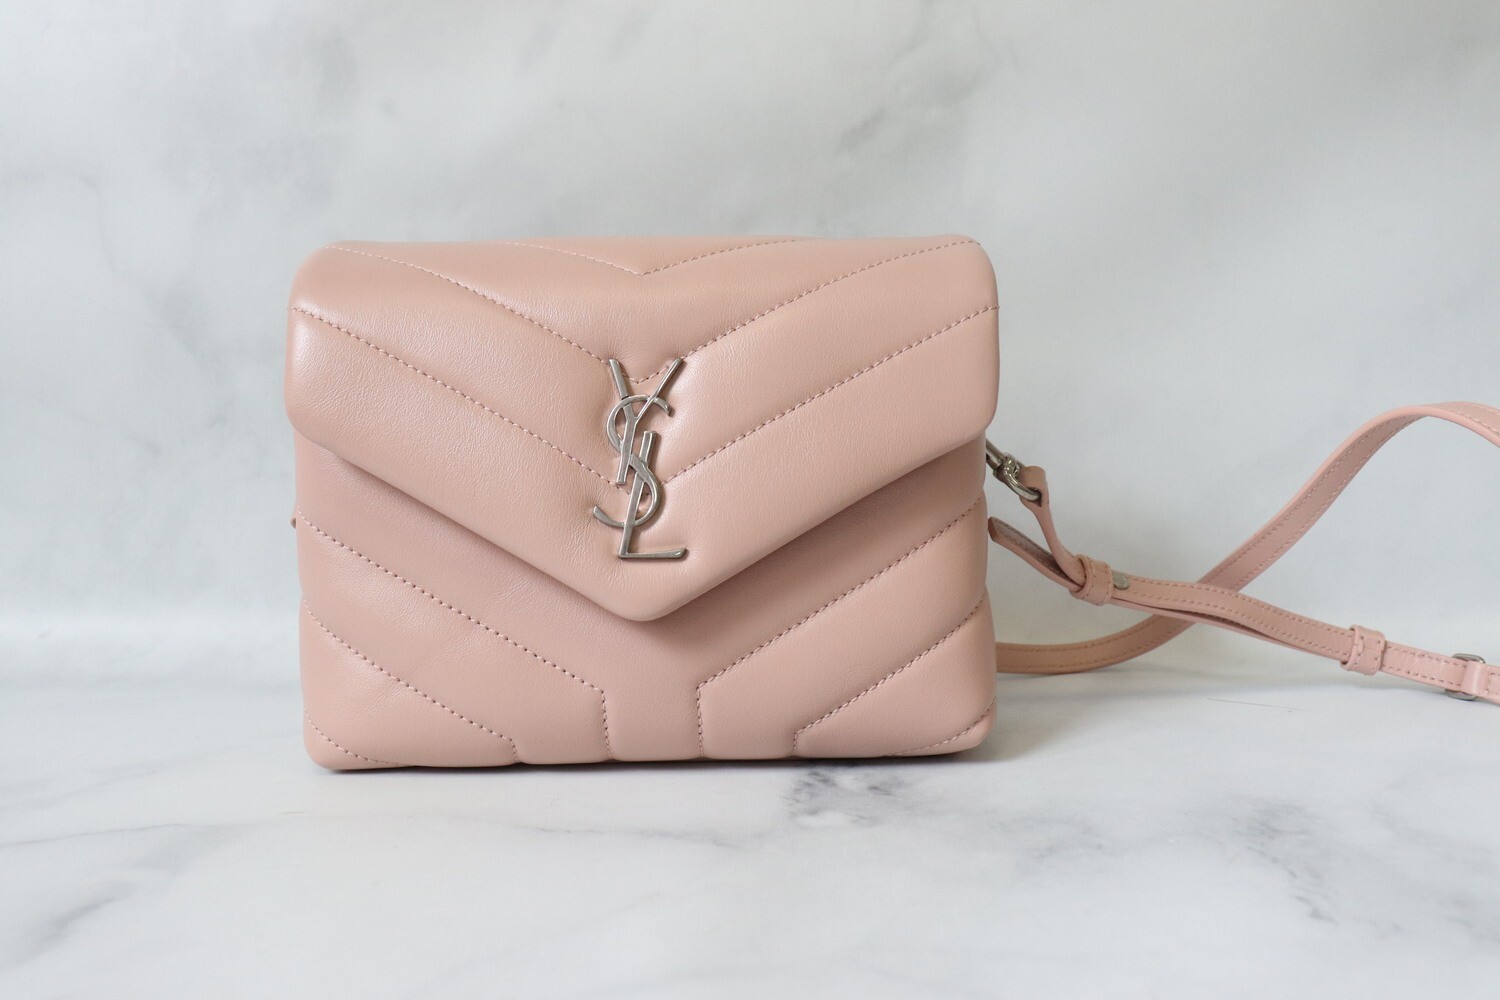 Saint Laurent YSL Backpack LouLou In Blush